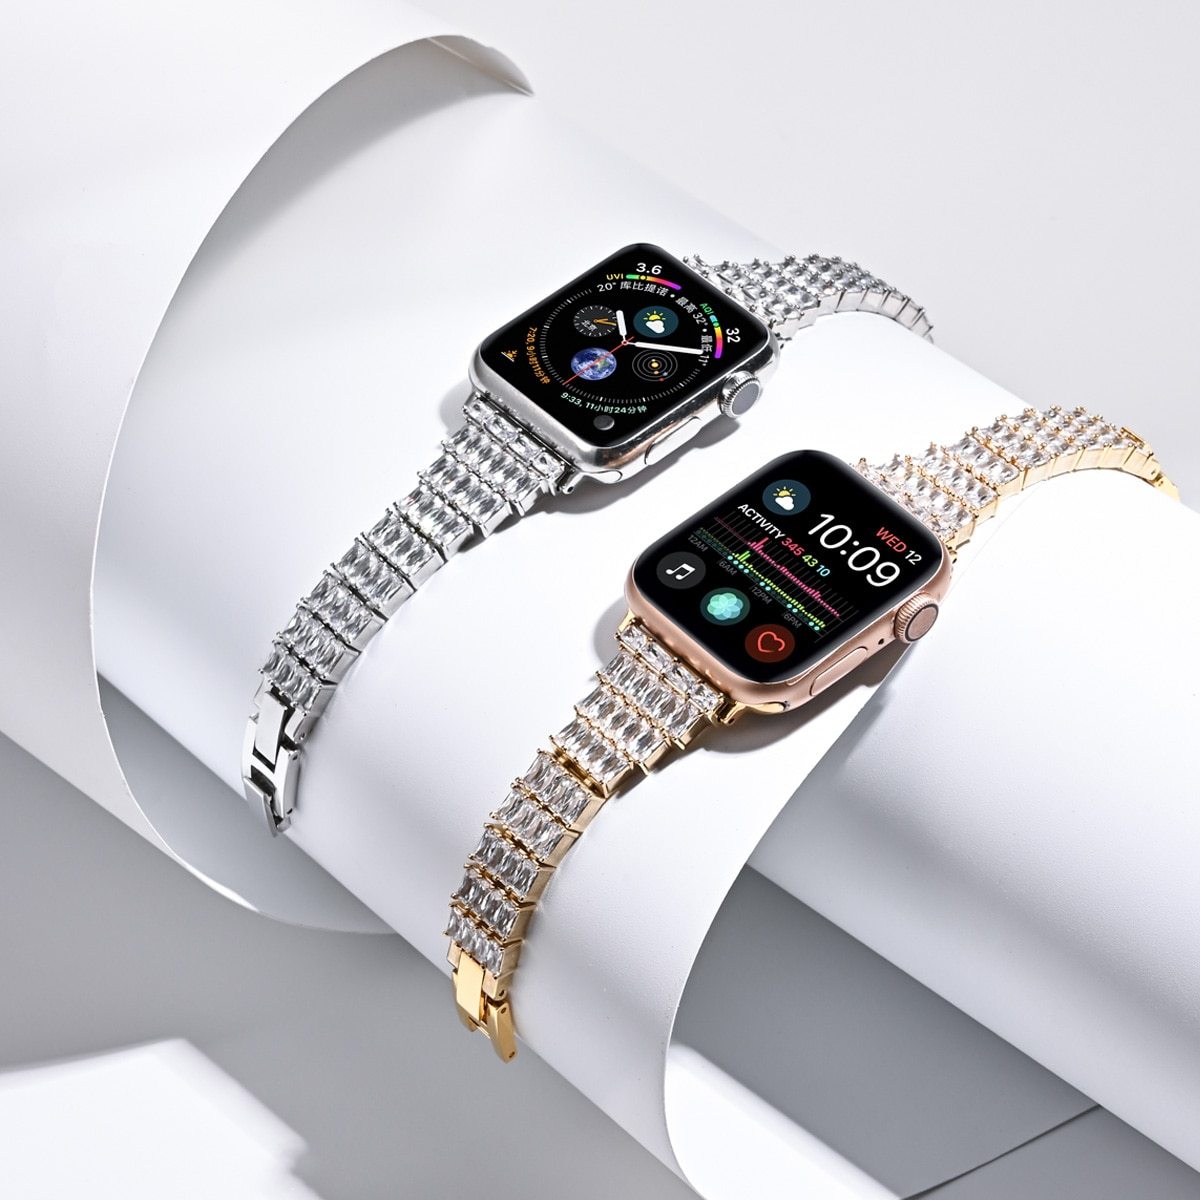  Luxury Band Compatible with Apple Watch SE Series 7/6